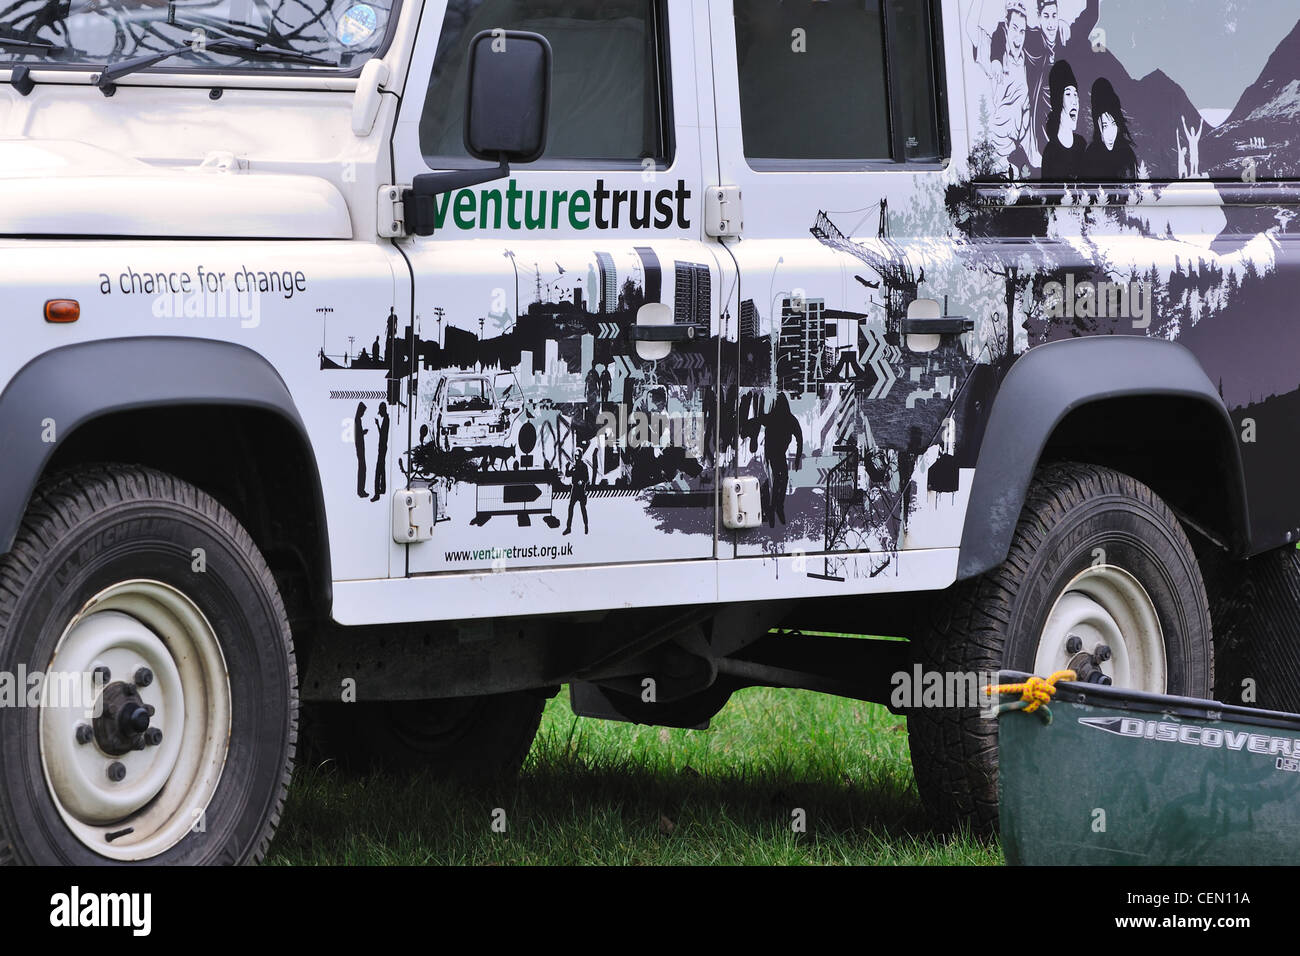 The venture trust Landrover and kayak Stock Photo